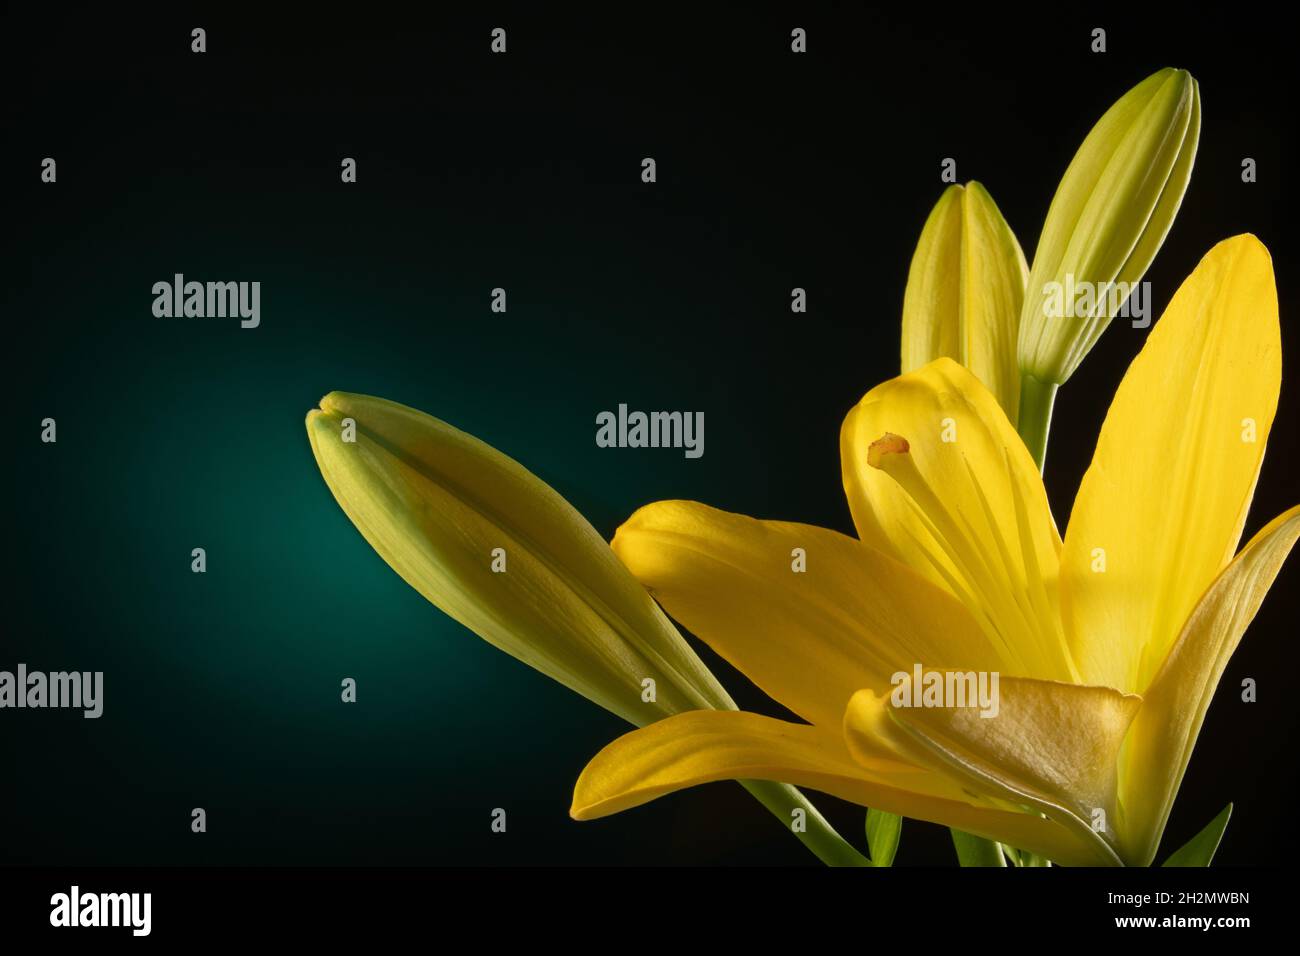 Beautiful yellow blooming lilly flower with buds isolated on dark green background with light spot Stock Photo